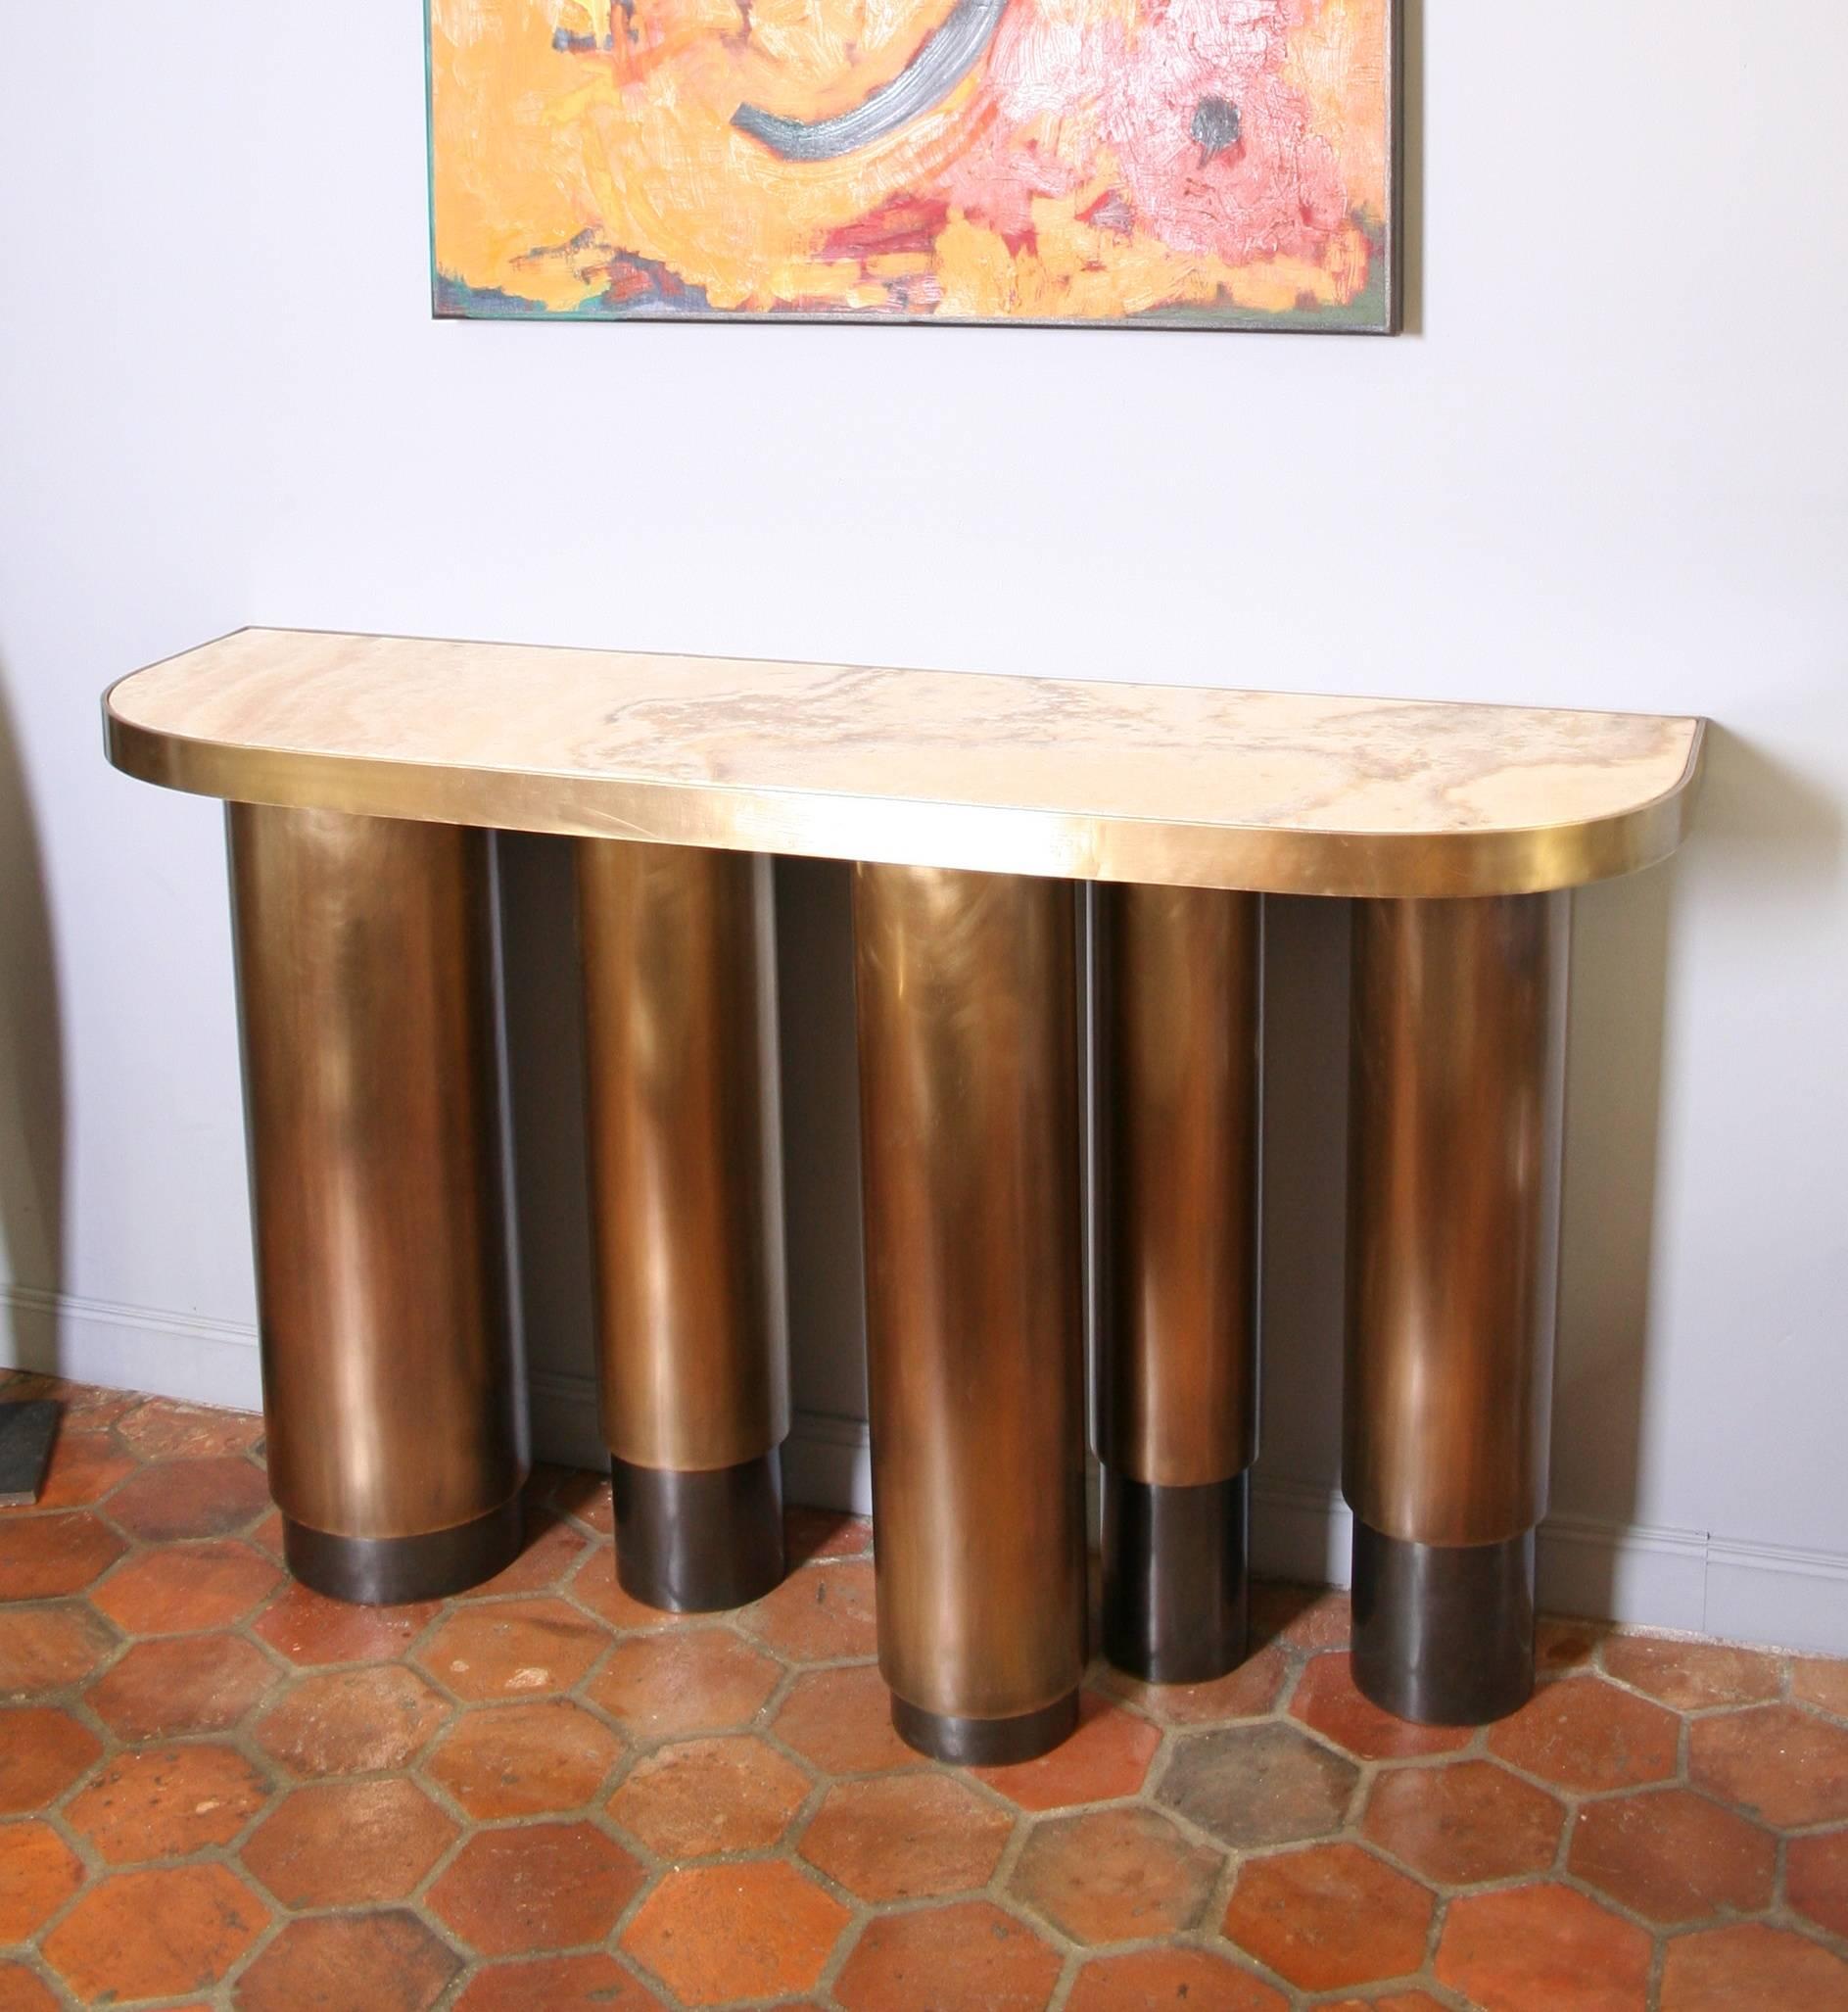 Console in Patinated Brass with Onyx Top - Exclusive Model by Arriau - Columnae
Dimensions : 85 cm High - 141 cm large - 42 cm width
Signed Arriau

Arriau is a French Manufacturer of high end and bespoque furniture in Bronze - Brass and gem stones